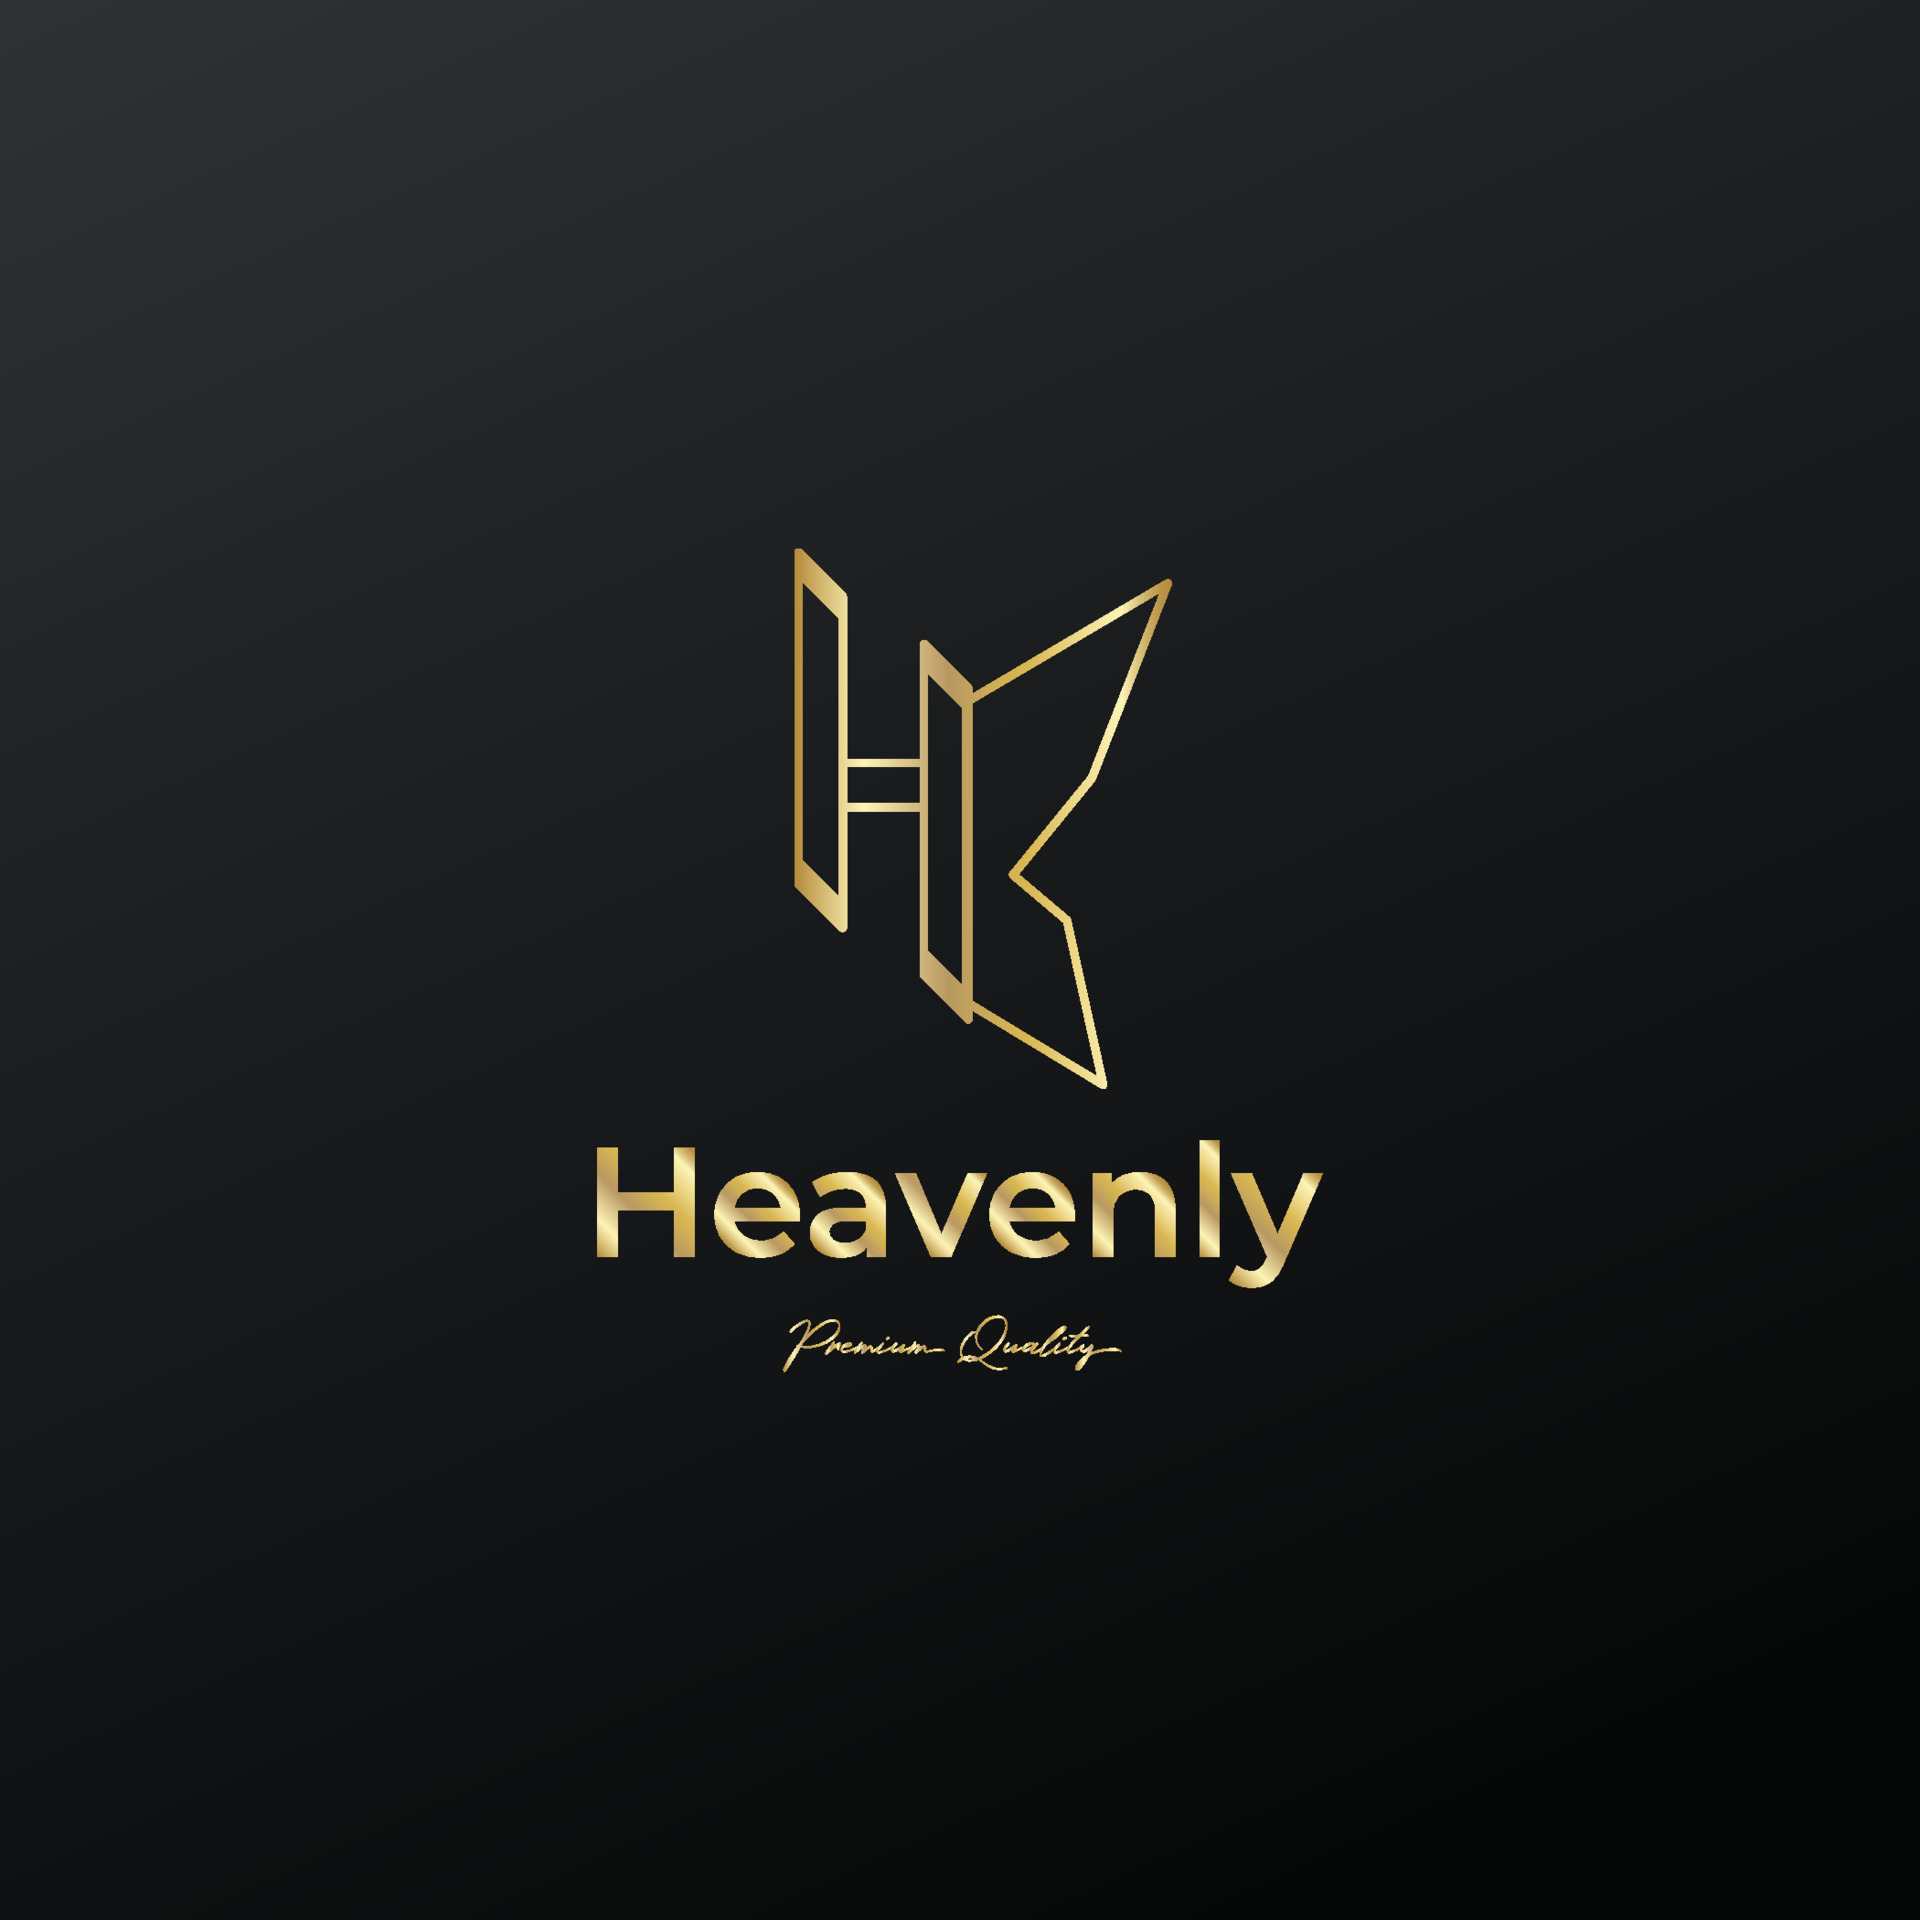 lettering h logotype with wings icon concept vector illustration design ...